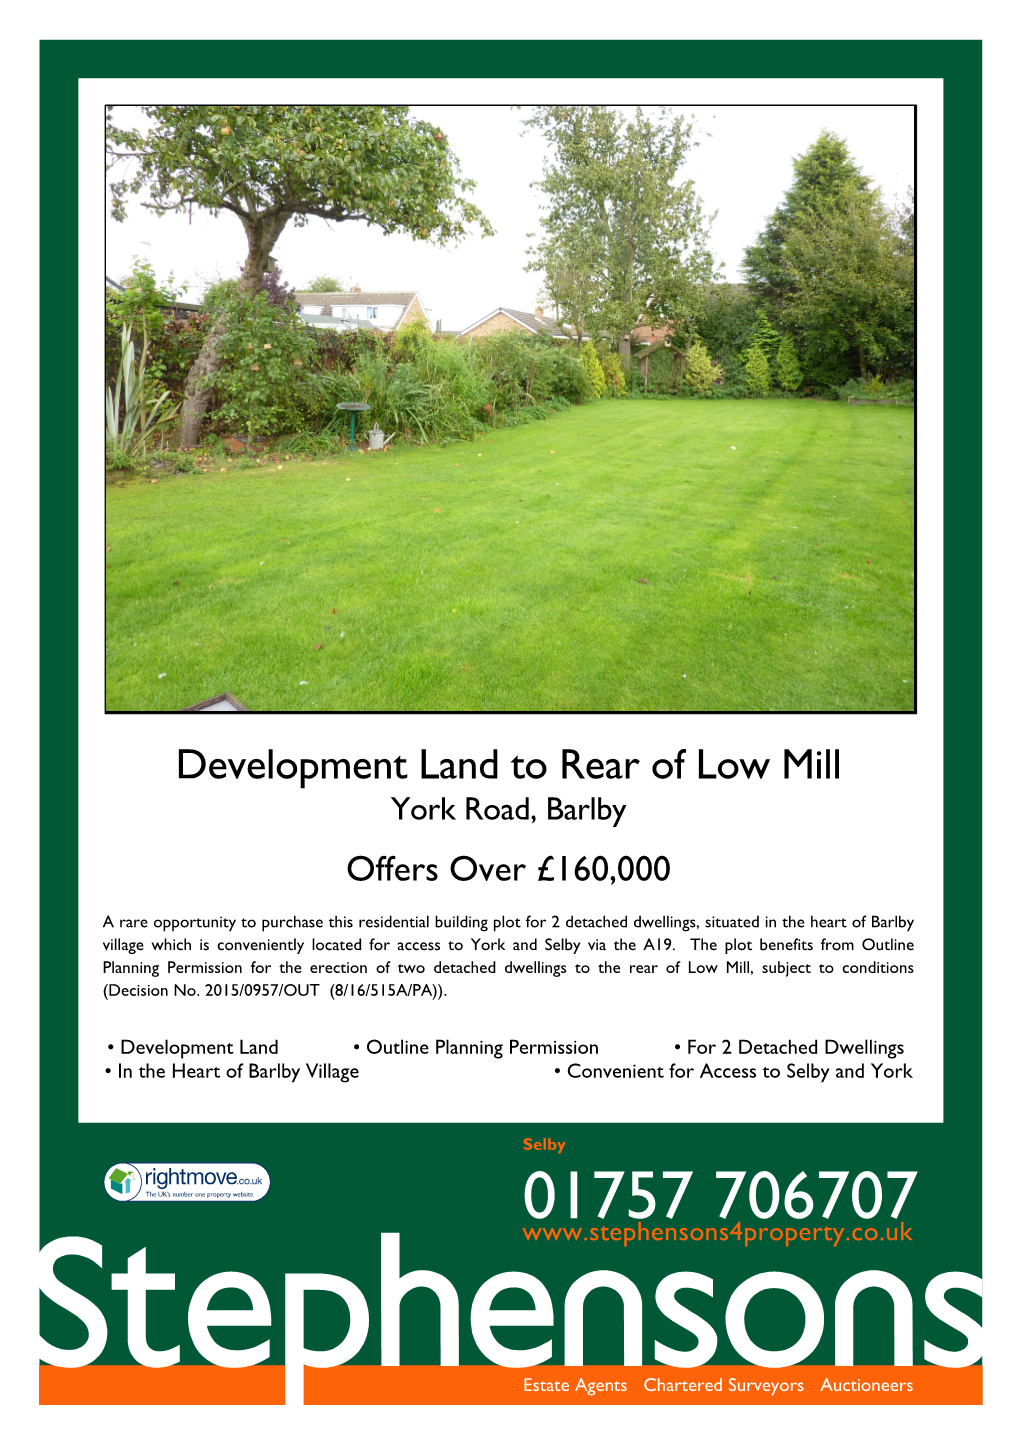 Development Land to Rear of Low Mill York Road, Barlby Offers Over £160,000